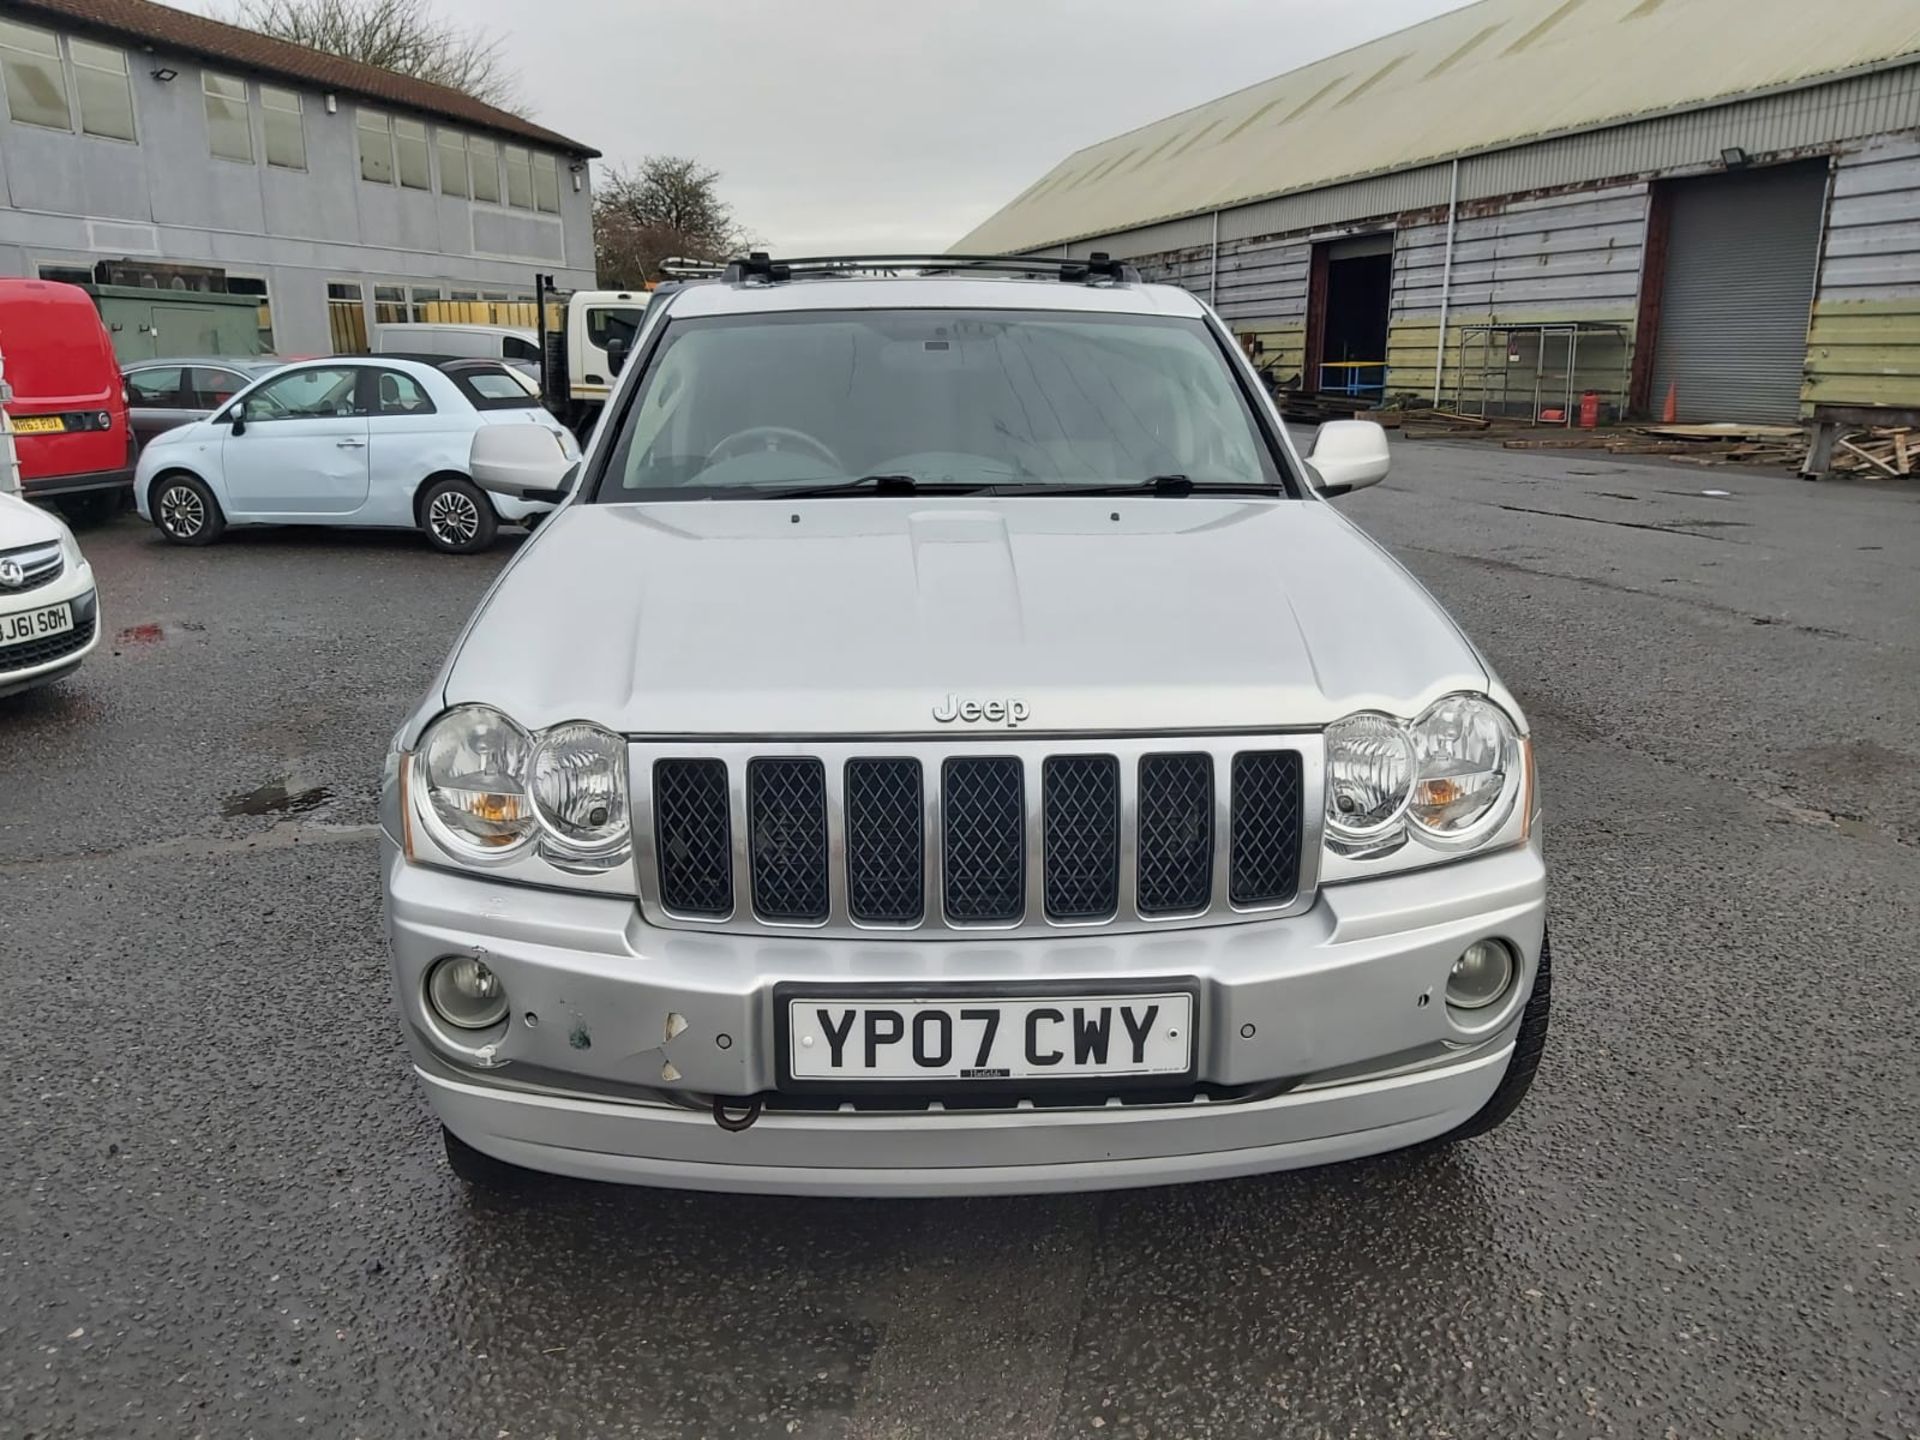 2007 JEEP G-CHEROKEE OVERLAND CRD A SILVER SUV ESTATE *NO VAT* - Image 2 of 17